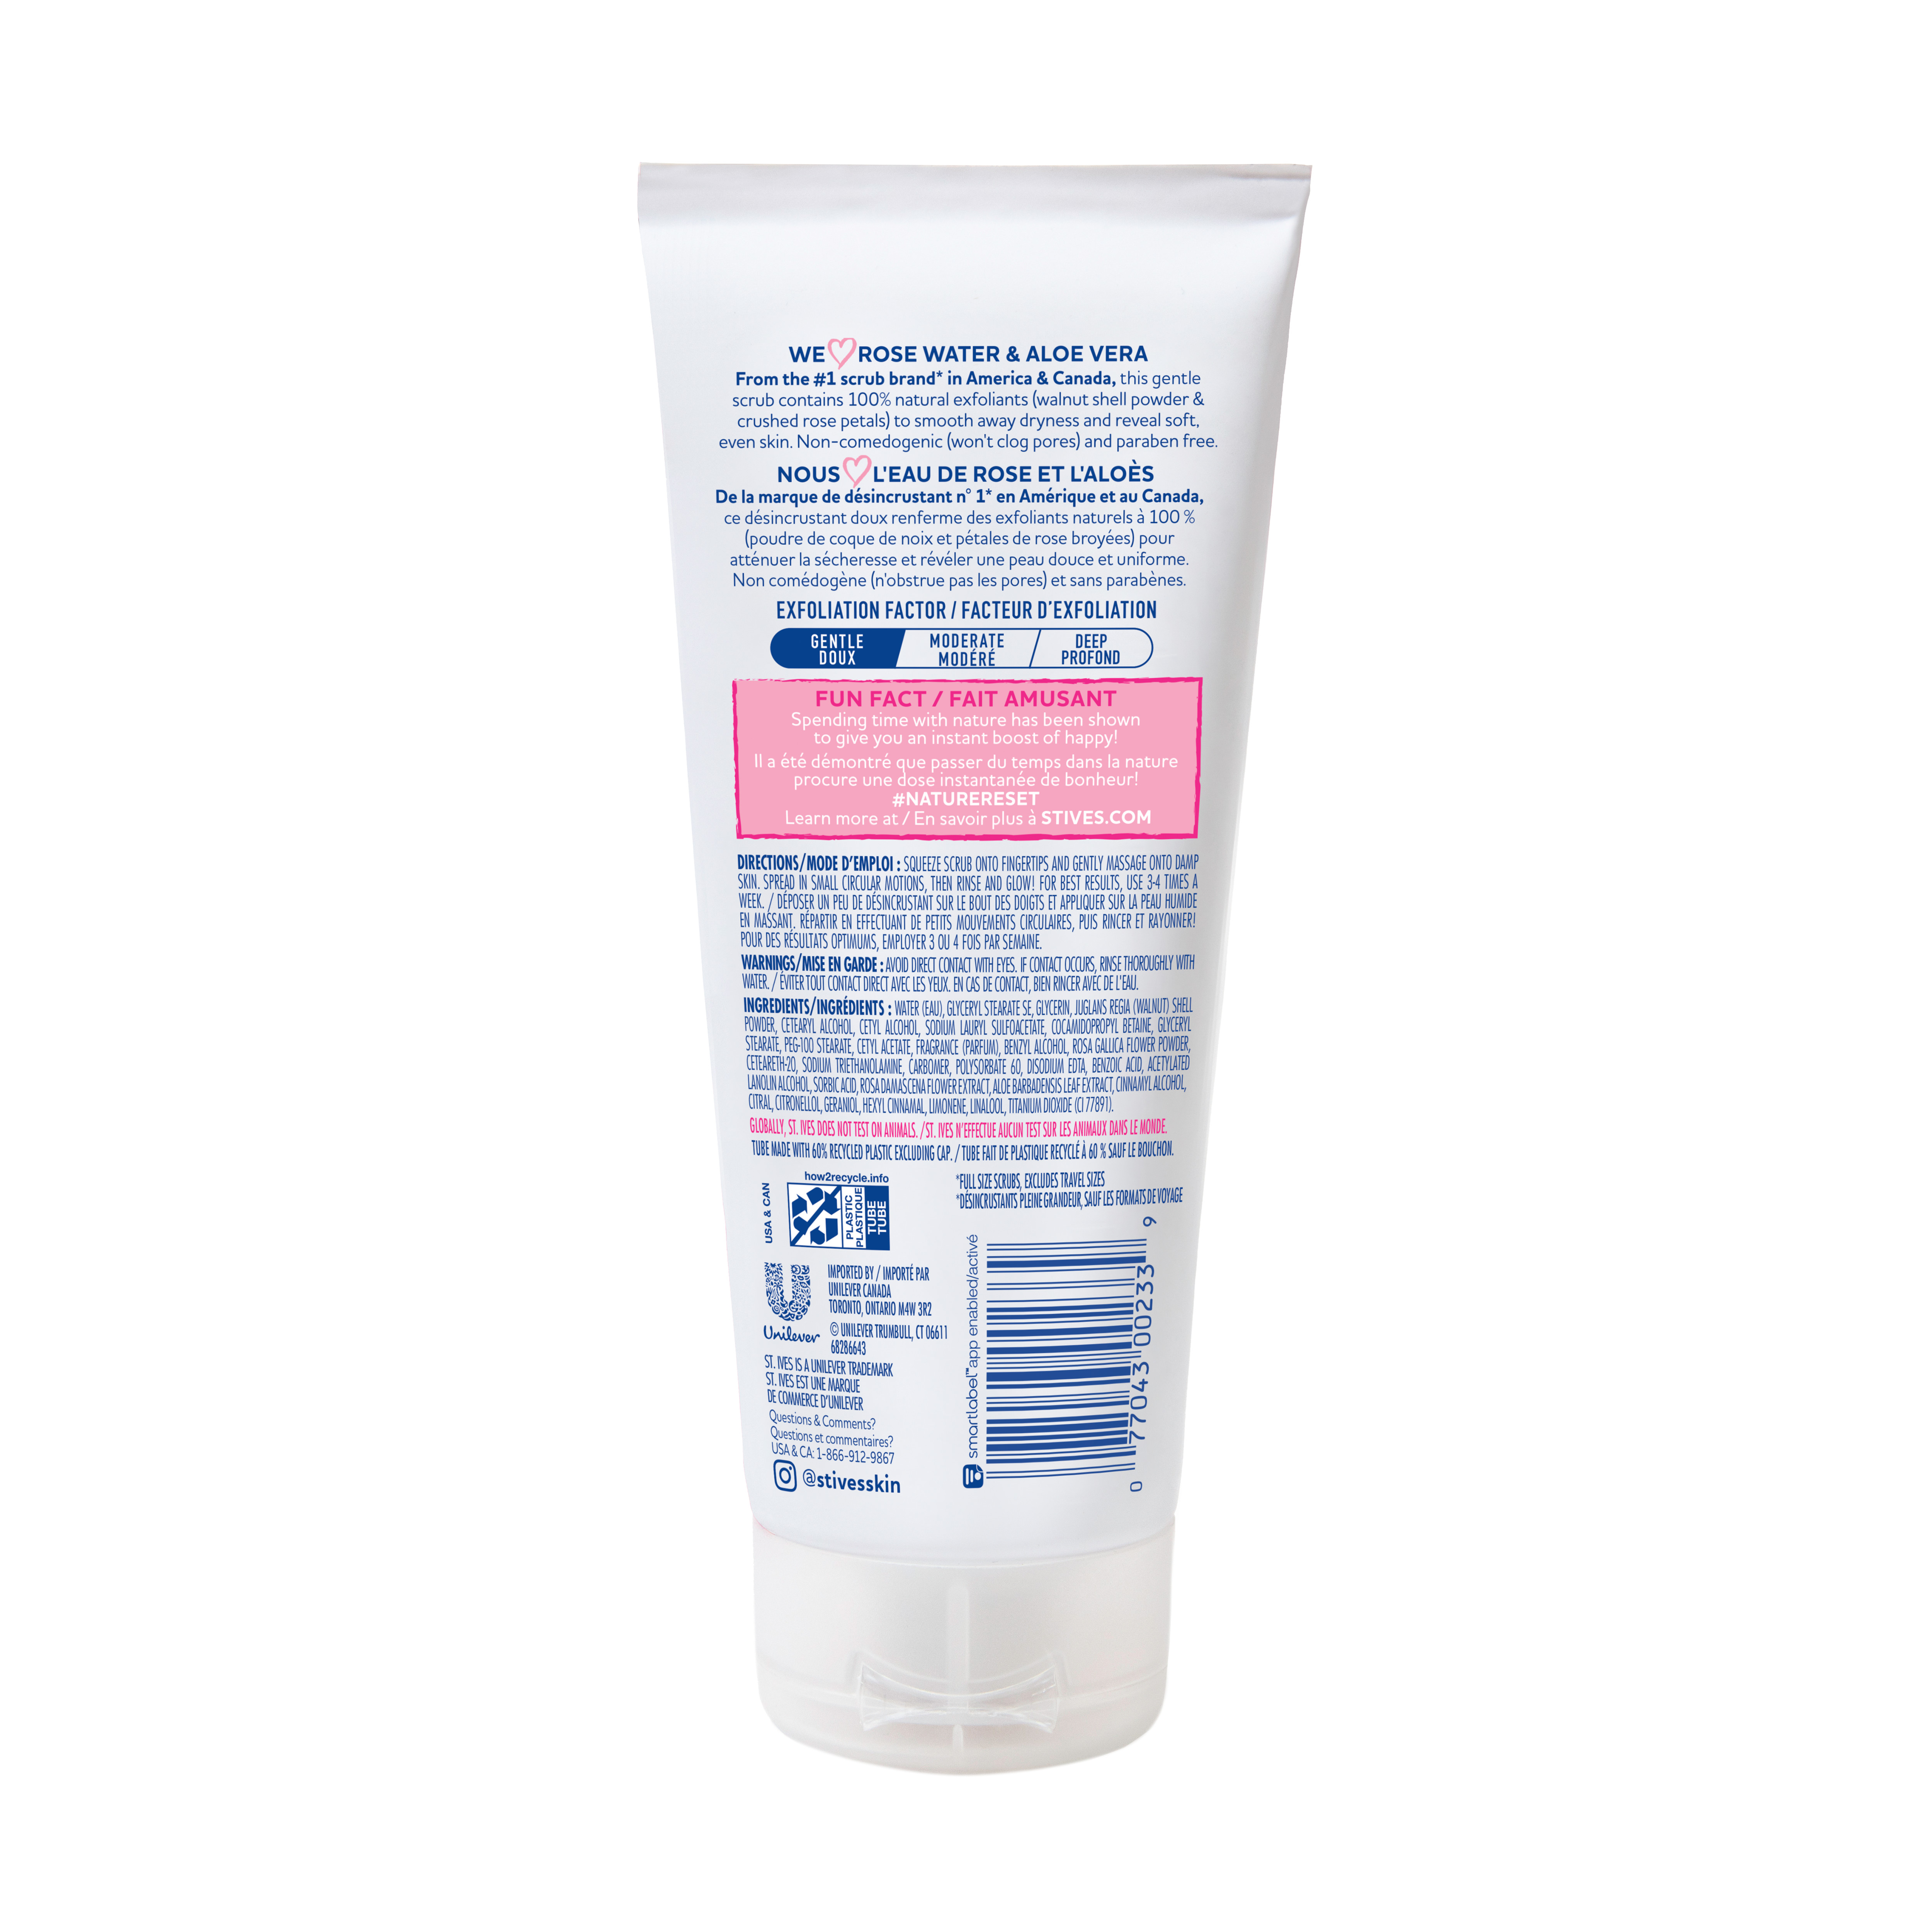 St. Ives Gentle Smoothing Face Scrub Rose Water & Aloe Vera Made with 100% Natural Exfoliants, Paraben Free, Oil-Free, Dermatologist Tested Our Gentlest Scrub Yet 6 oz - image 4 of 5